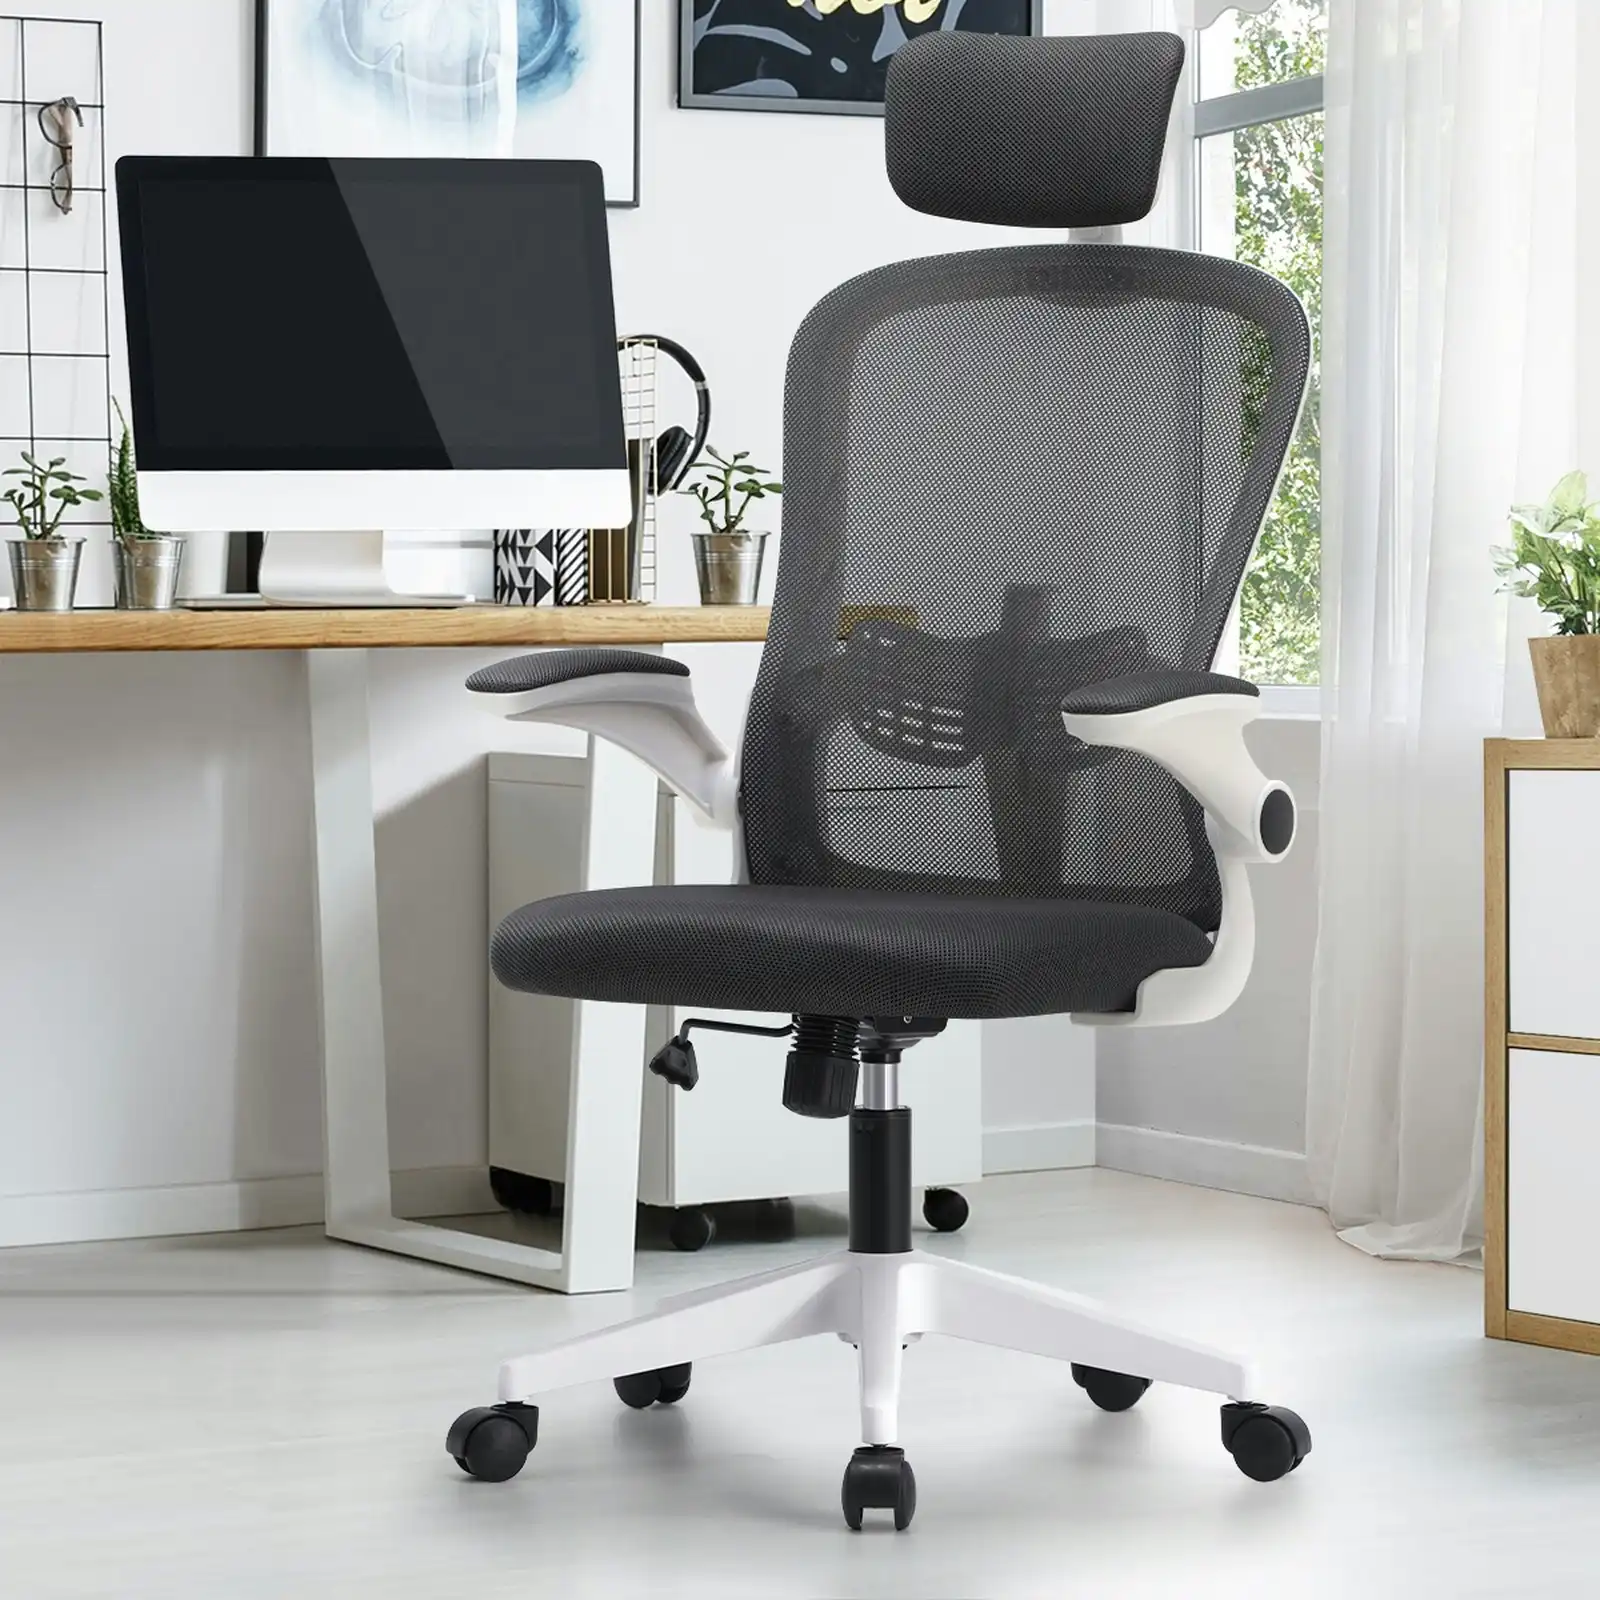 Oikiture Mesh Office Chair Executive Gaming Seat Racing Computer DARK GREY&WHITE